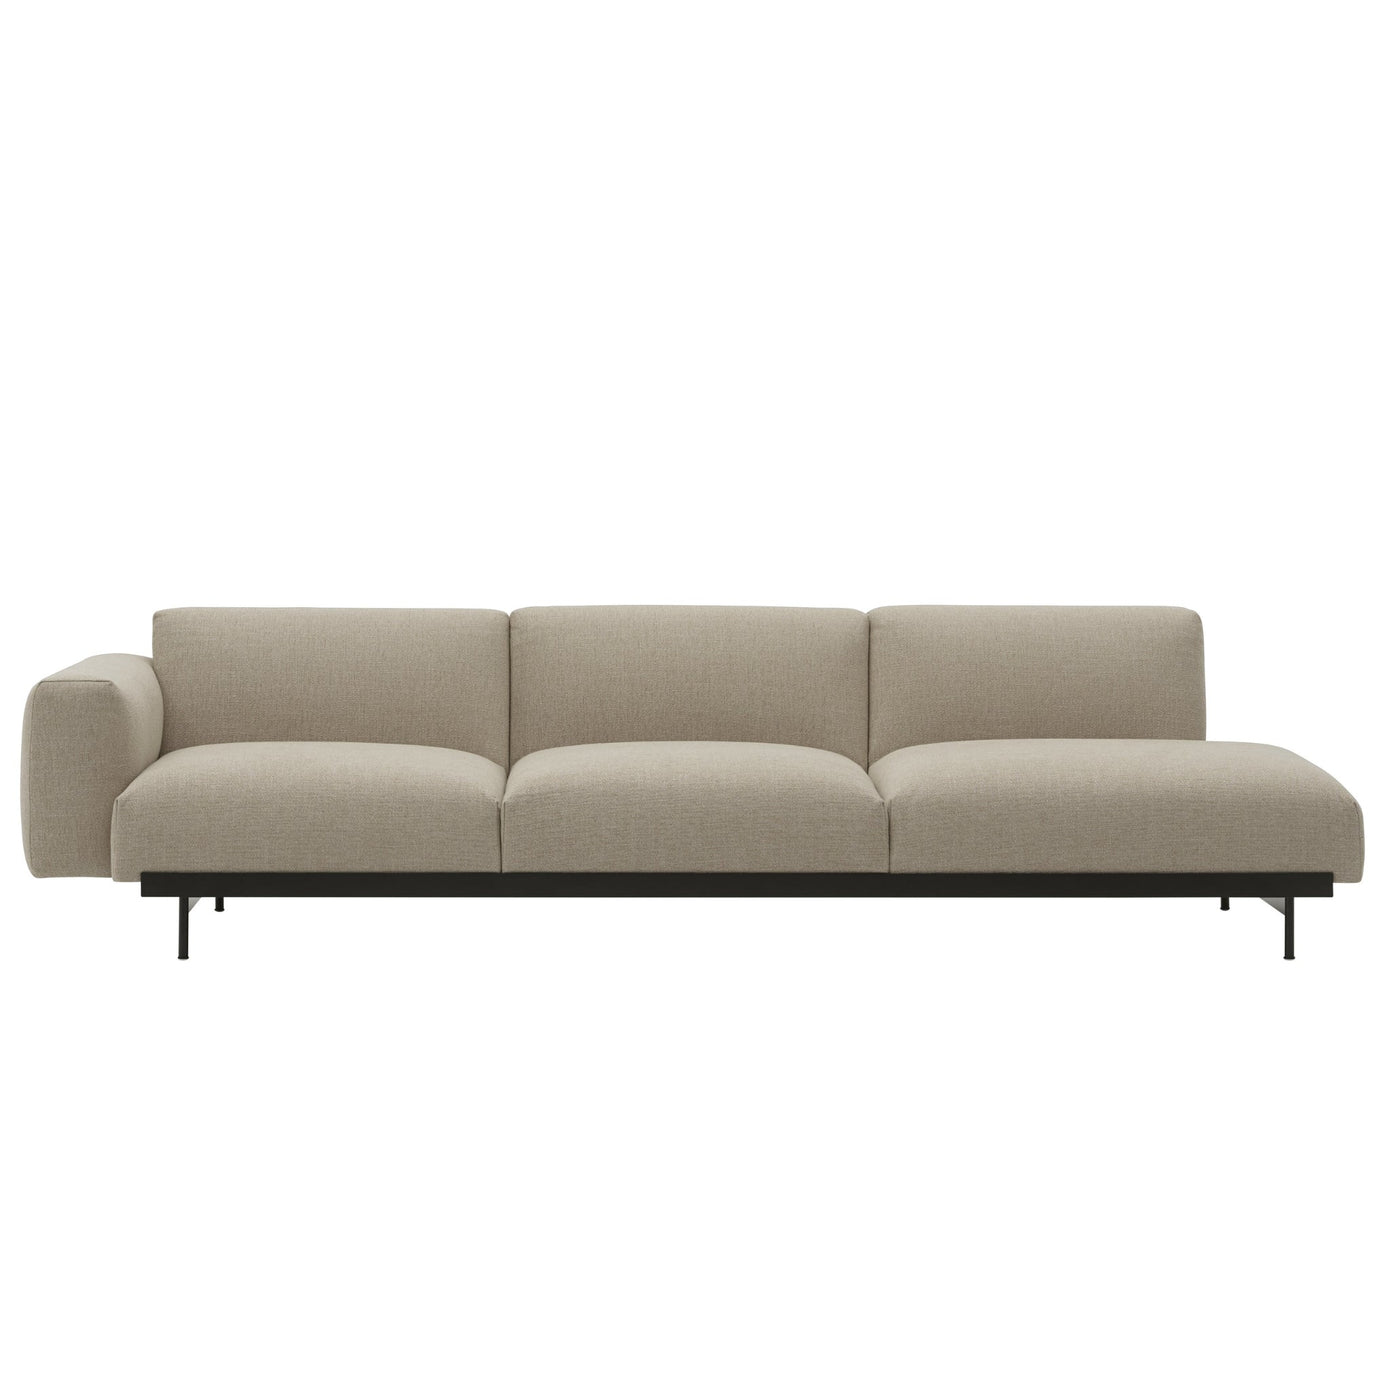 Muuto In Situ Modular 3 Seater Sofa, configuration 3. Made to order from someday designs. #colour_ecriture-240